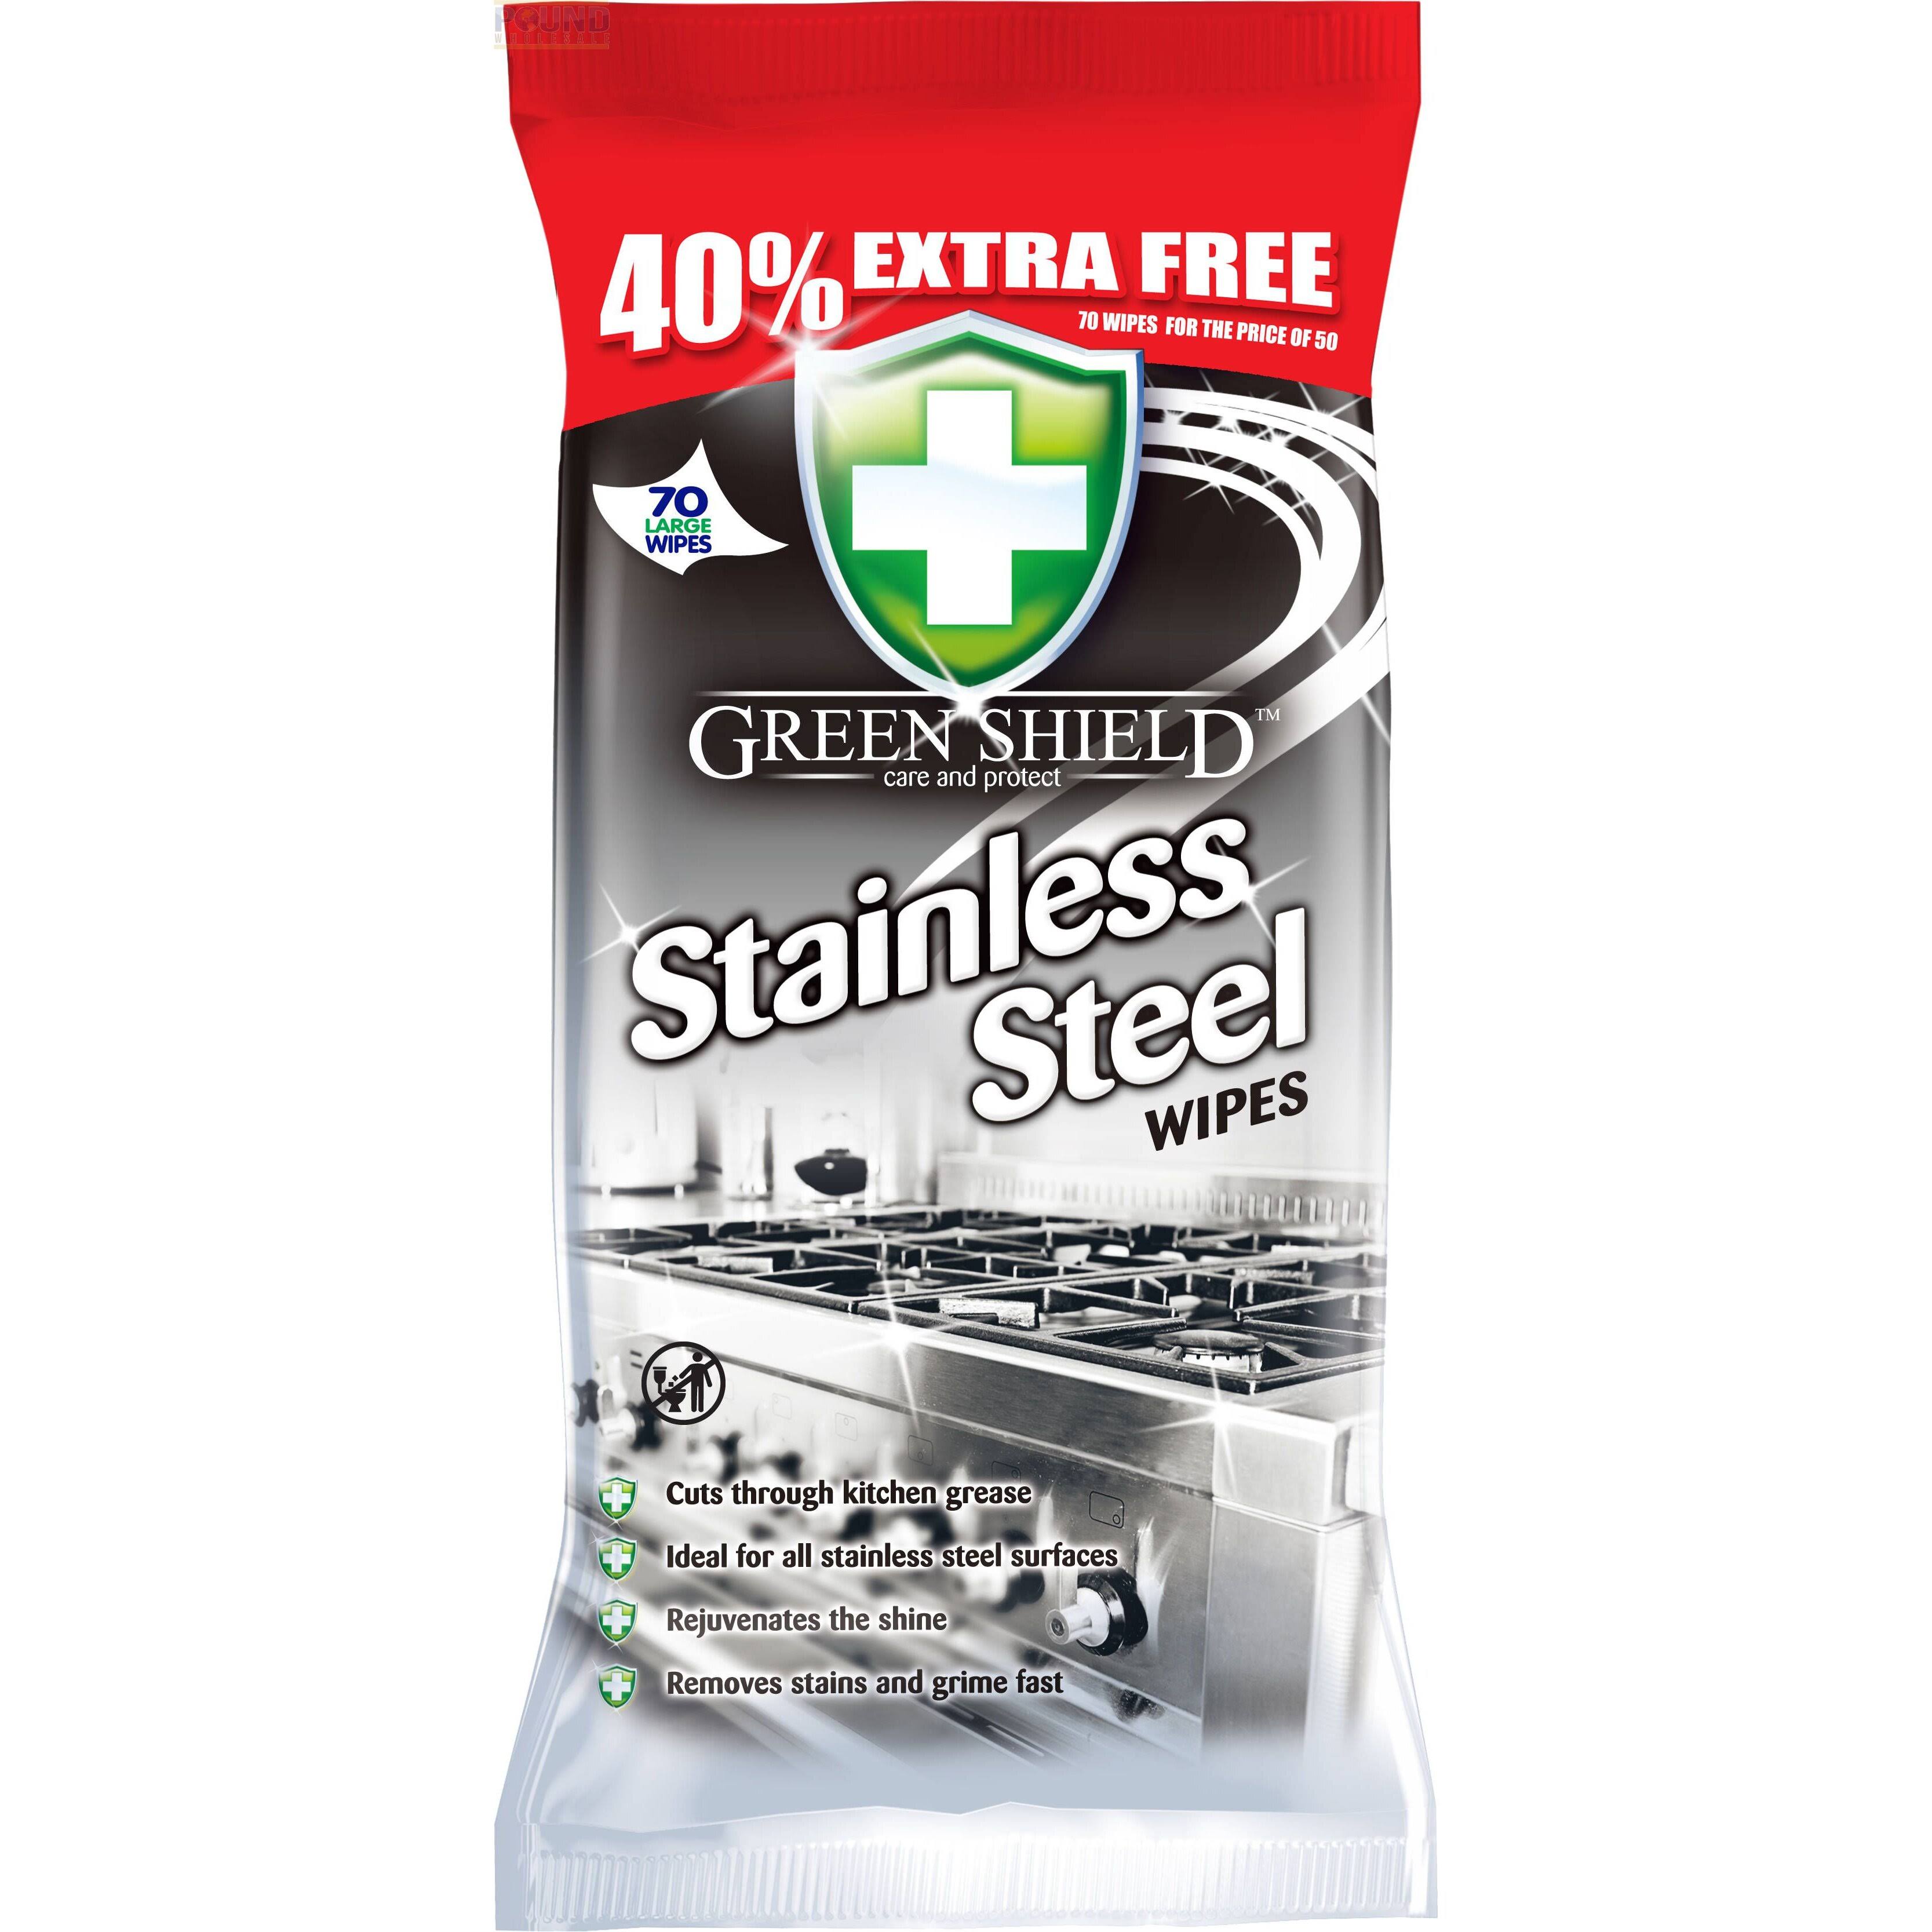 Green Shield Stainless Steel 70 Wipes